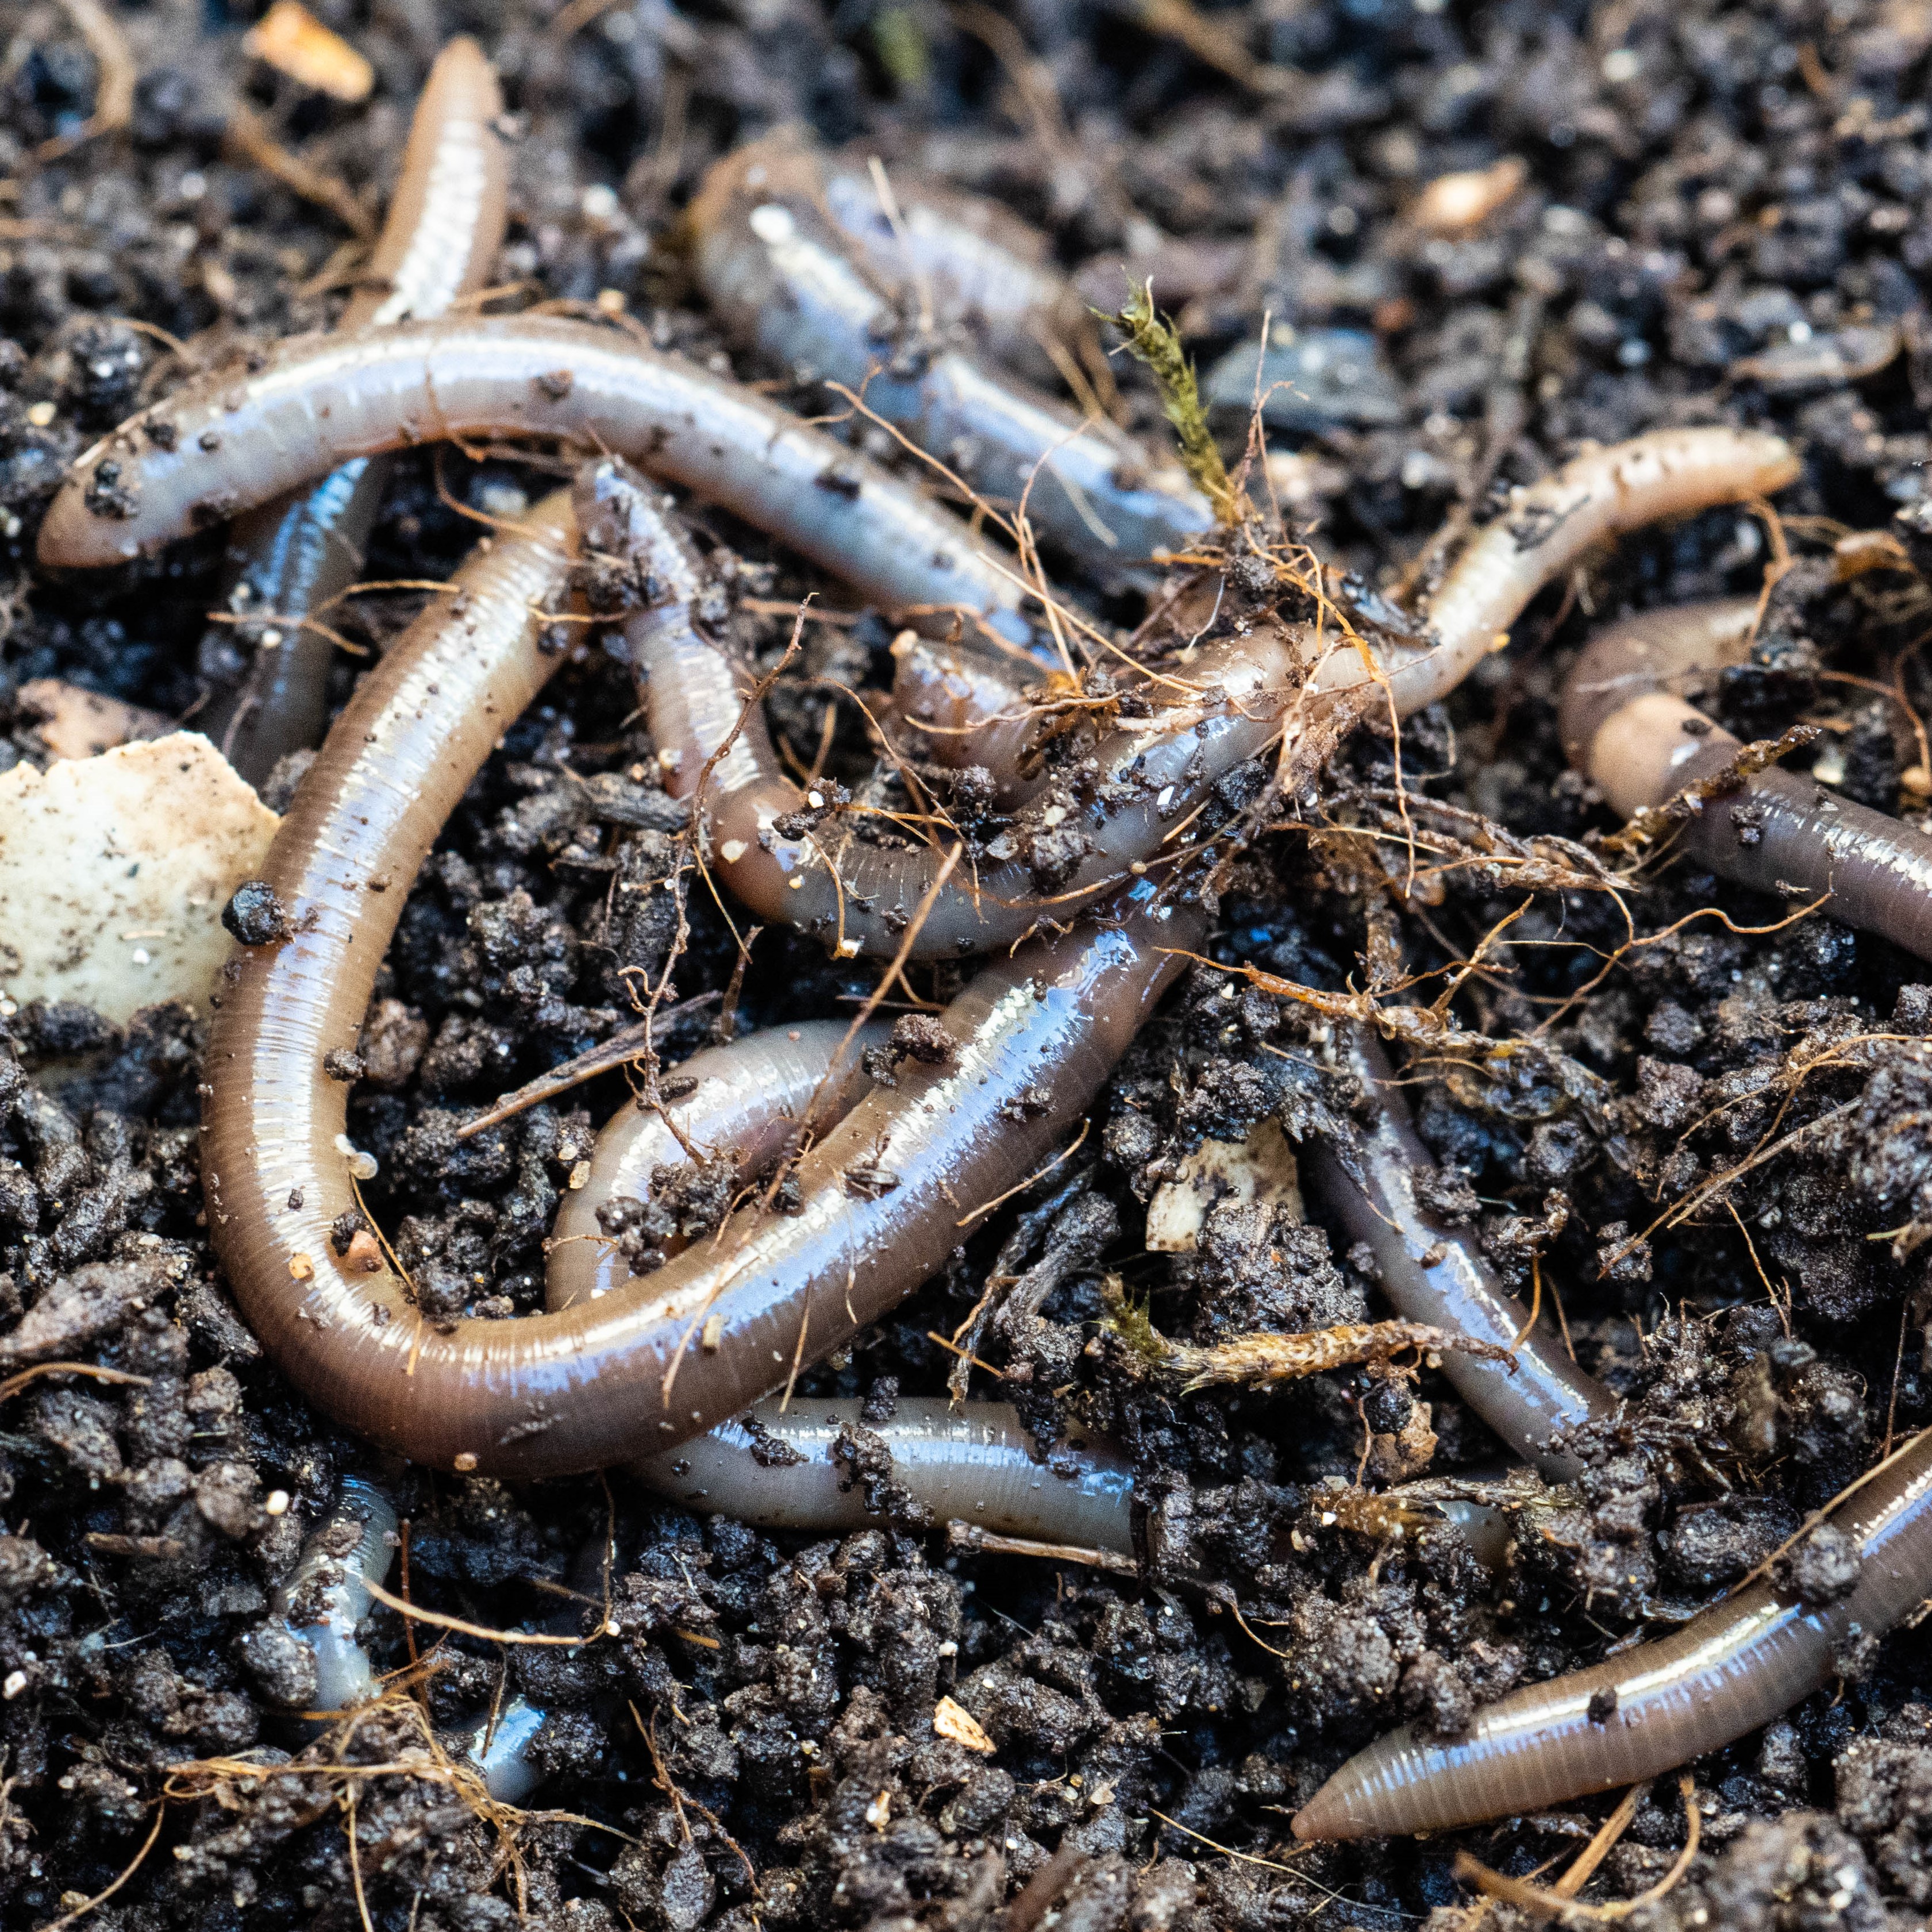 Jumping Worms - Canadian Council on Invasive Species